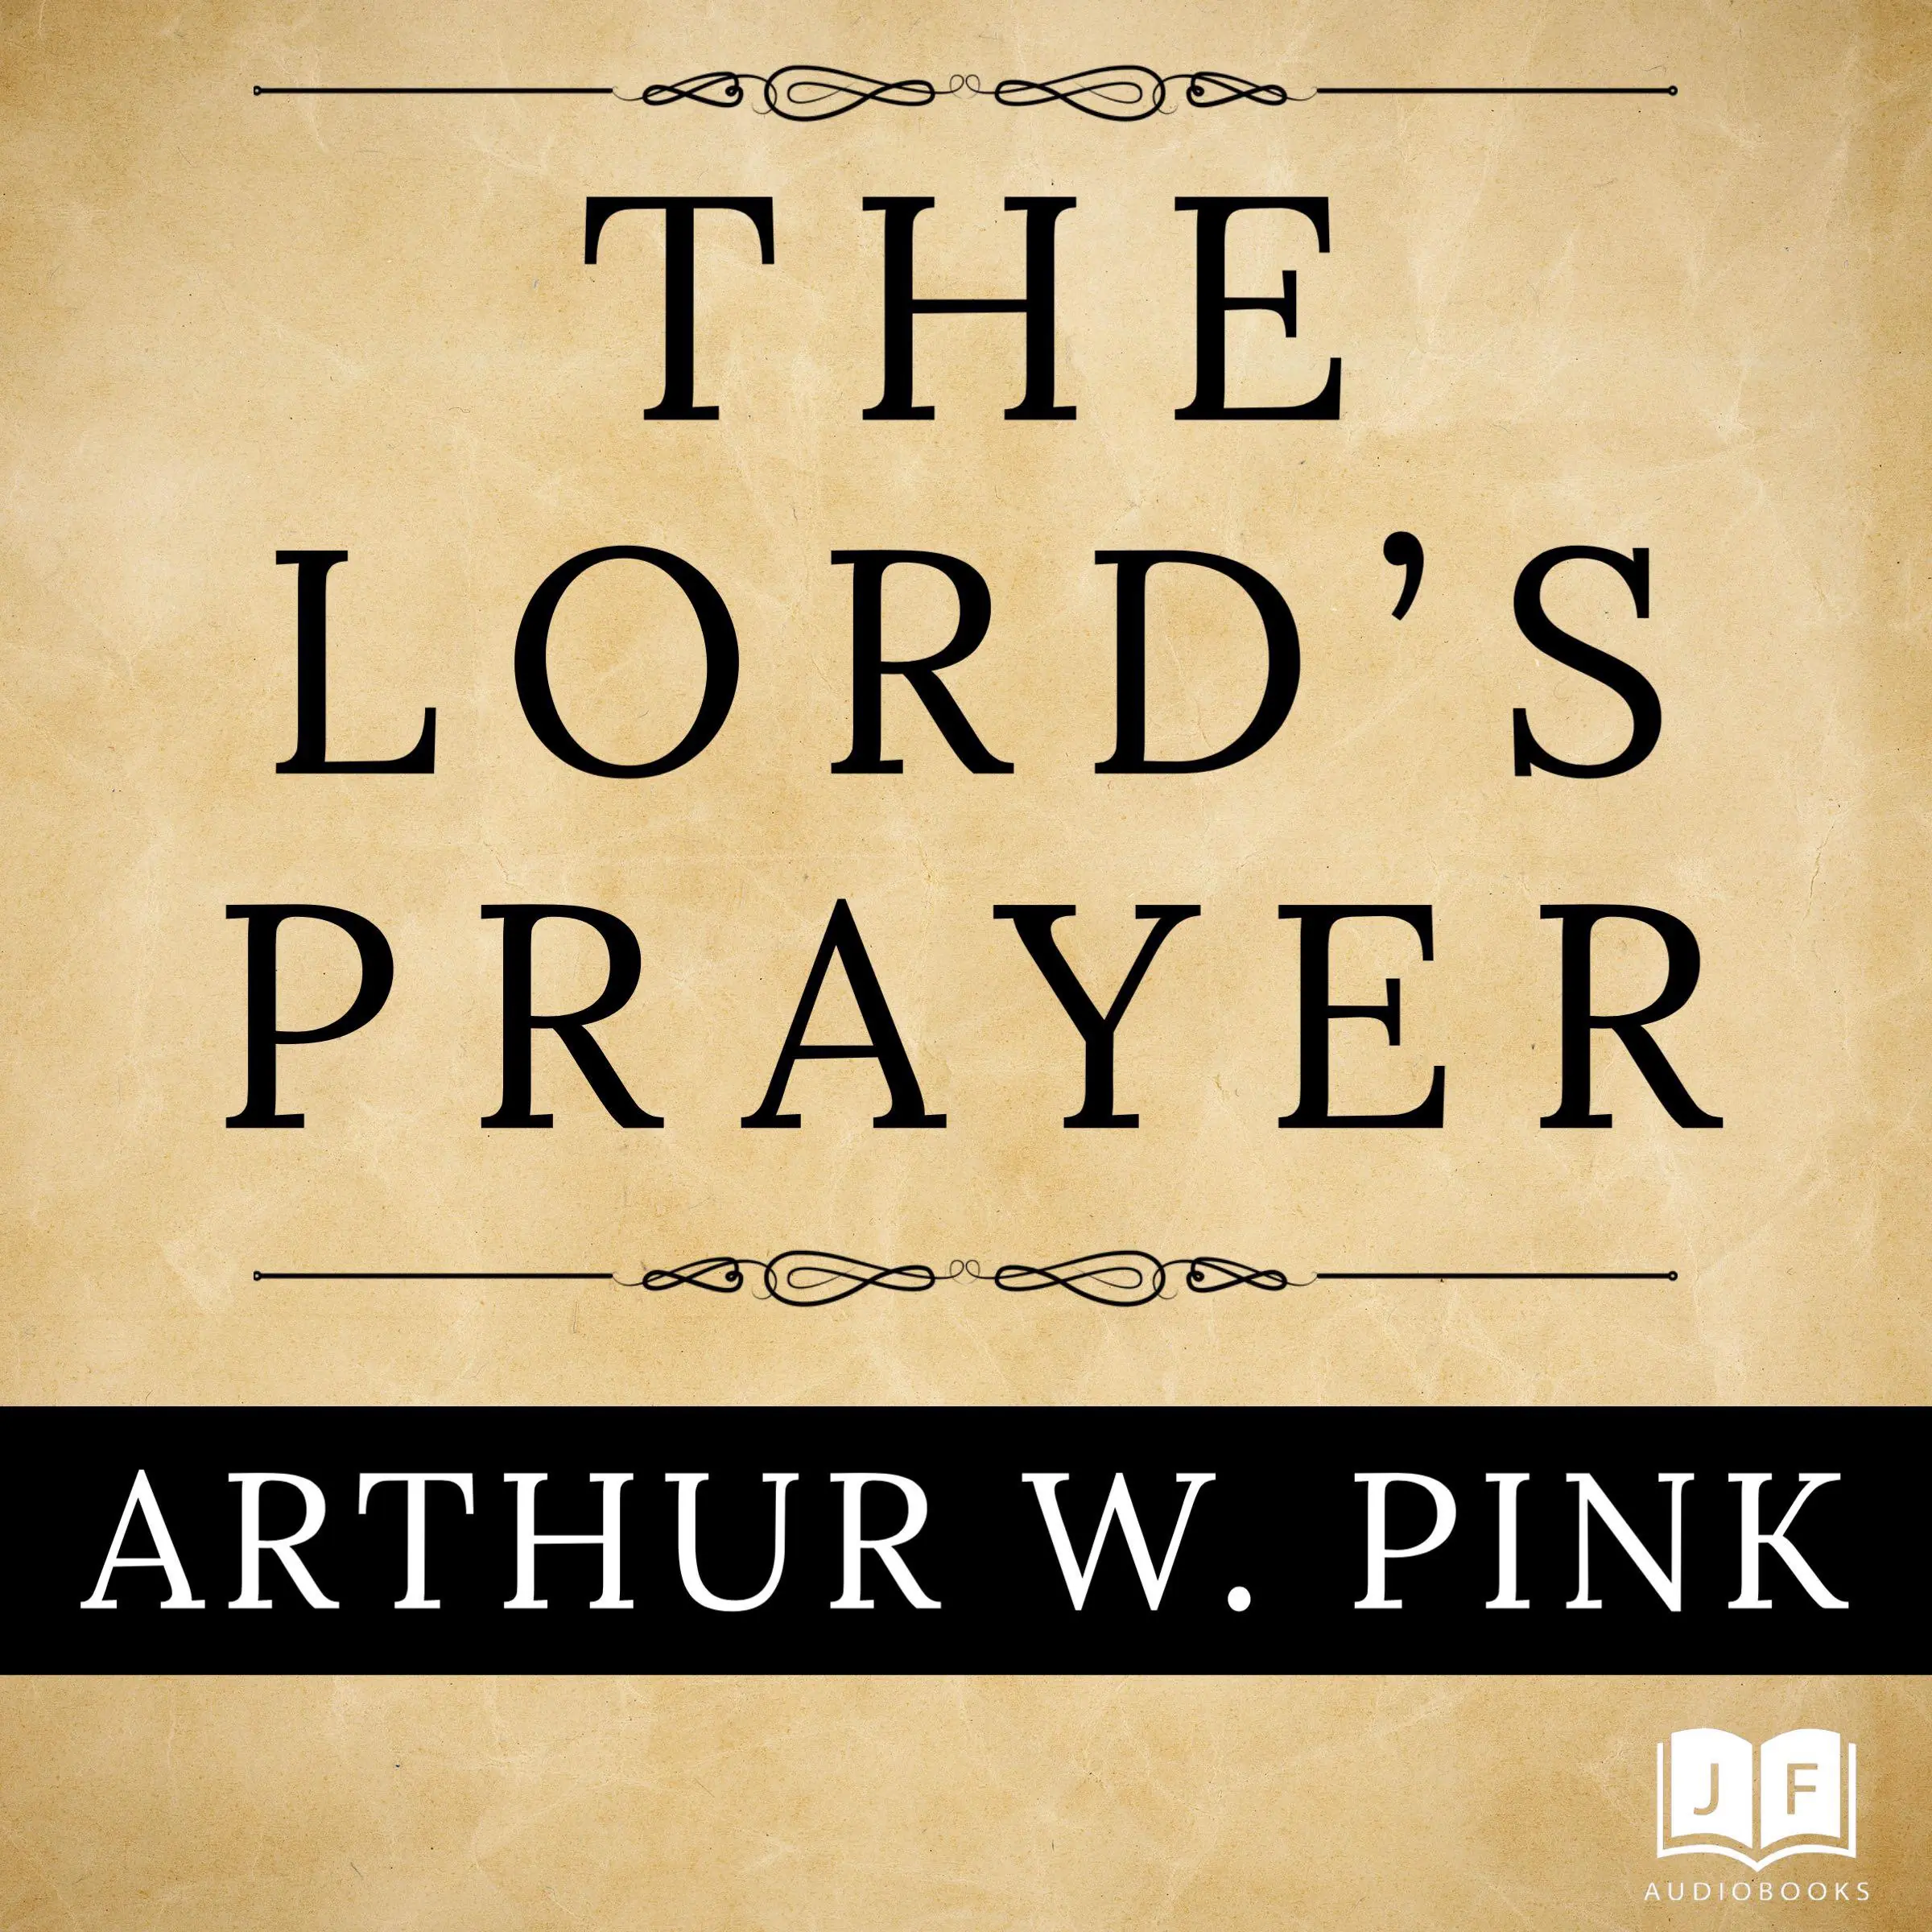 The Lord's Prayer by Arthur W. Pink Audiobook